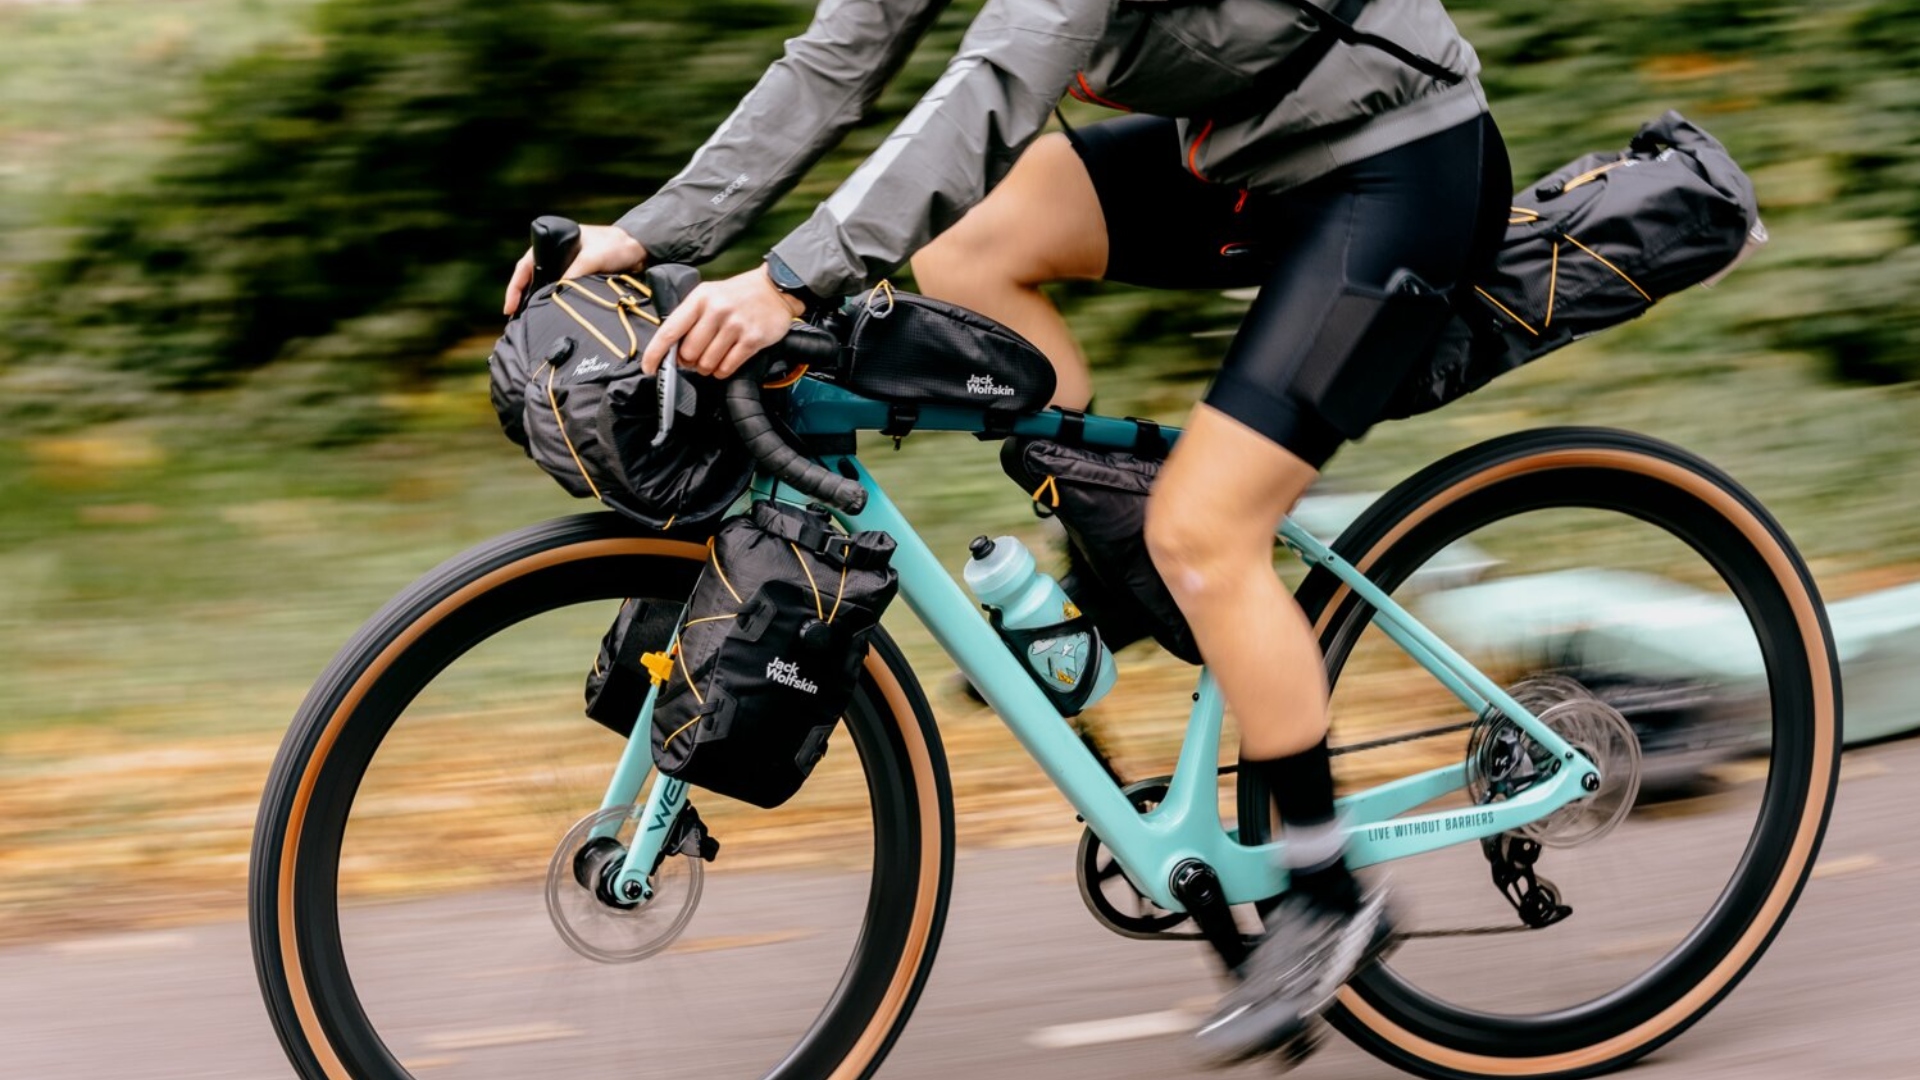 Outdoor clothing brand Jack Wolfskin doubles down on bikepacking apparel  and luggage | Cycling Weekly